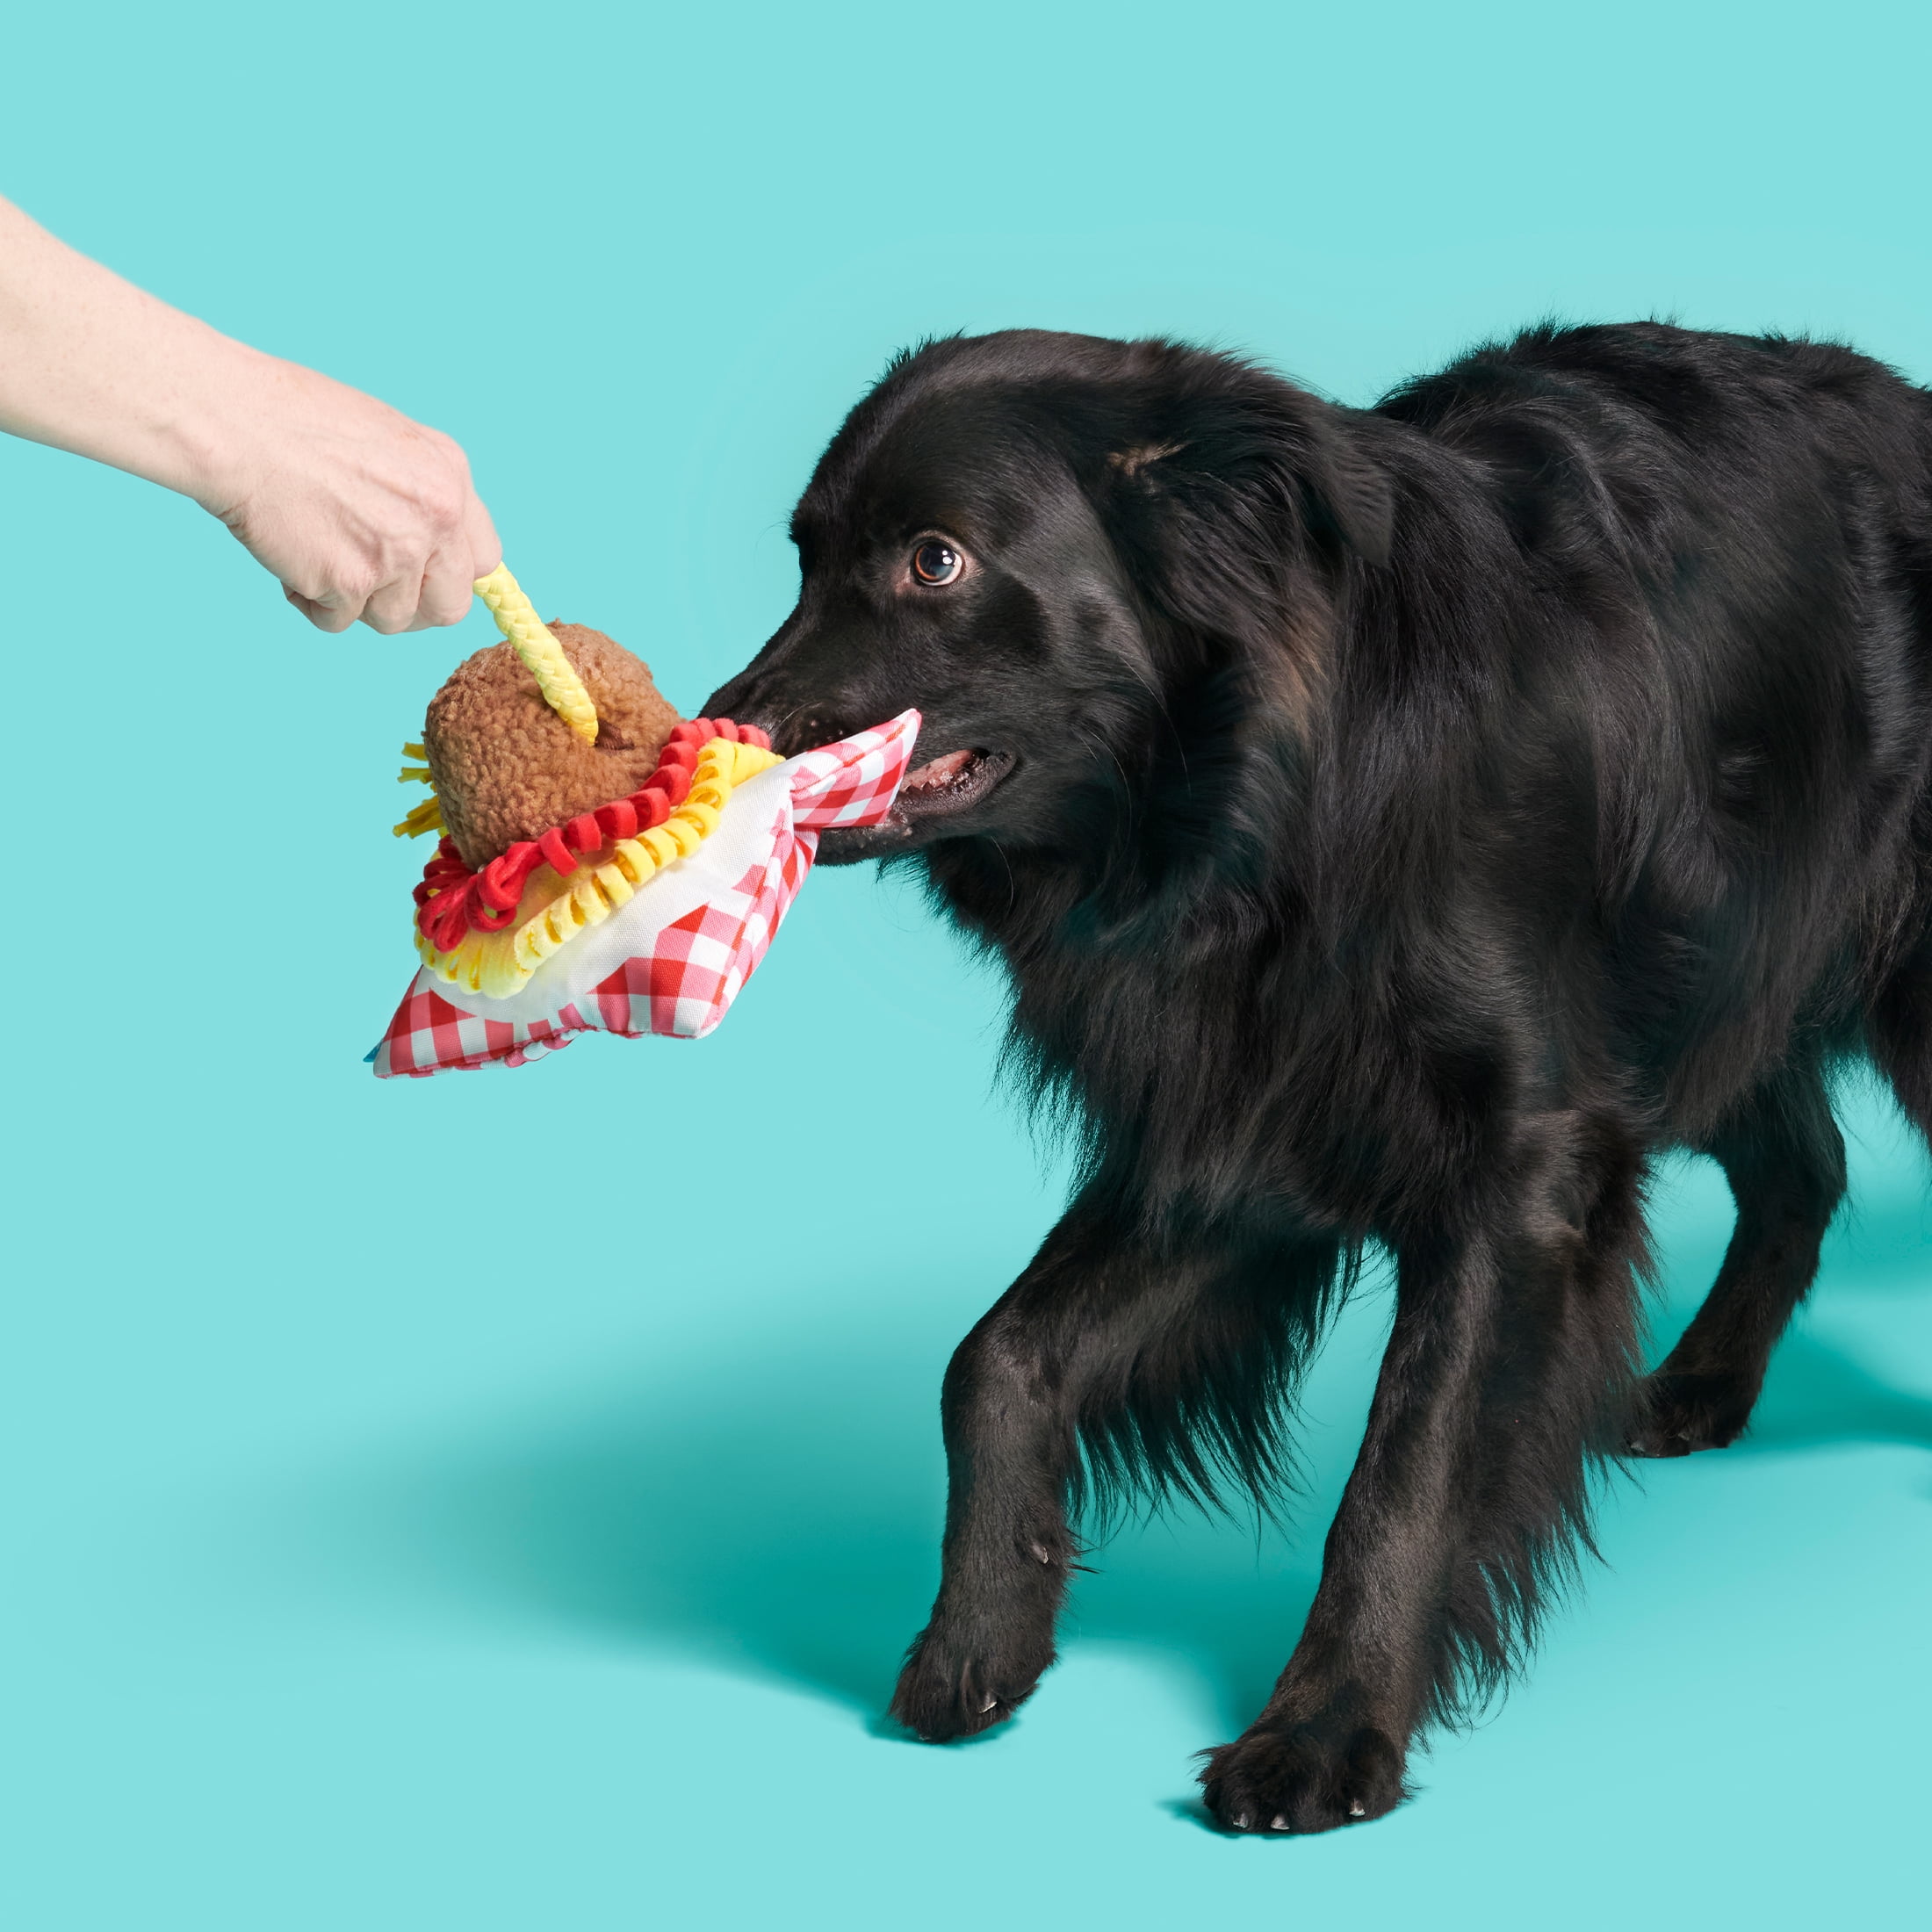 BARK Cookout Burger & Ketchup Dog Toy – Rover Store